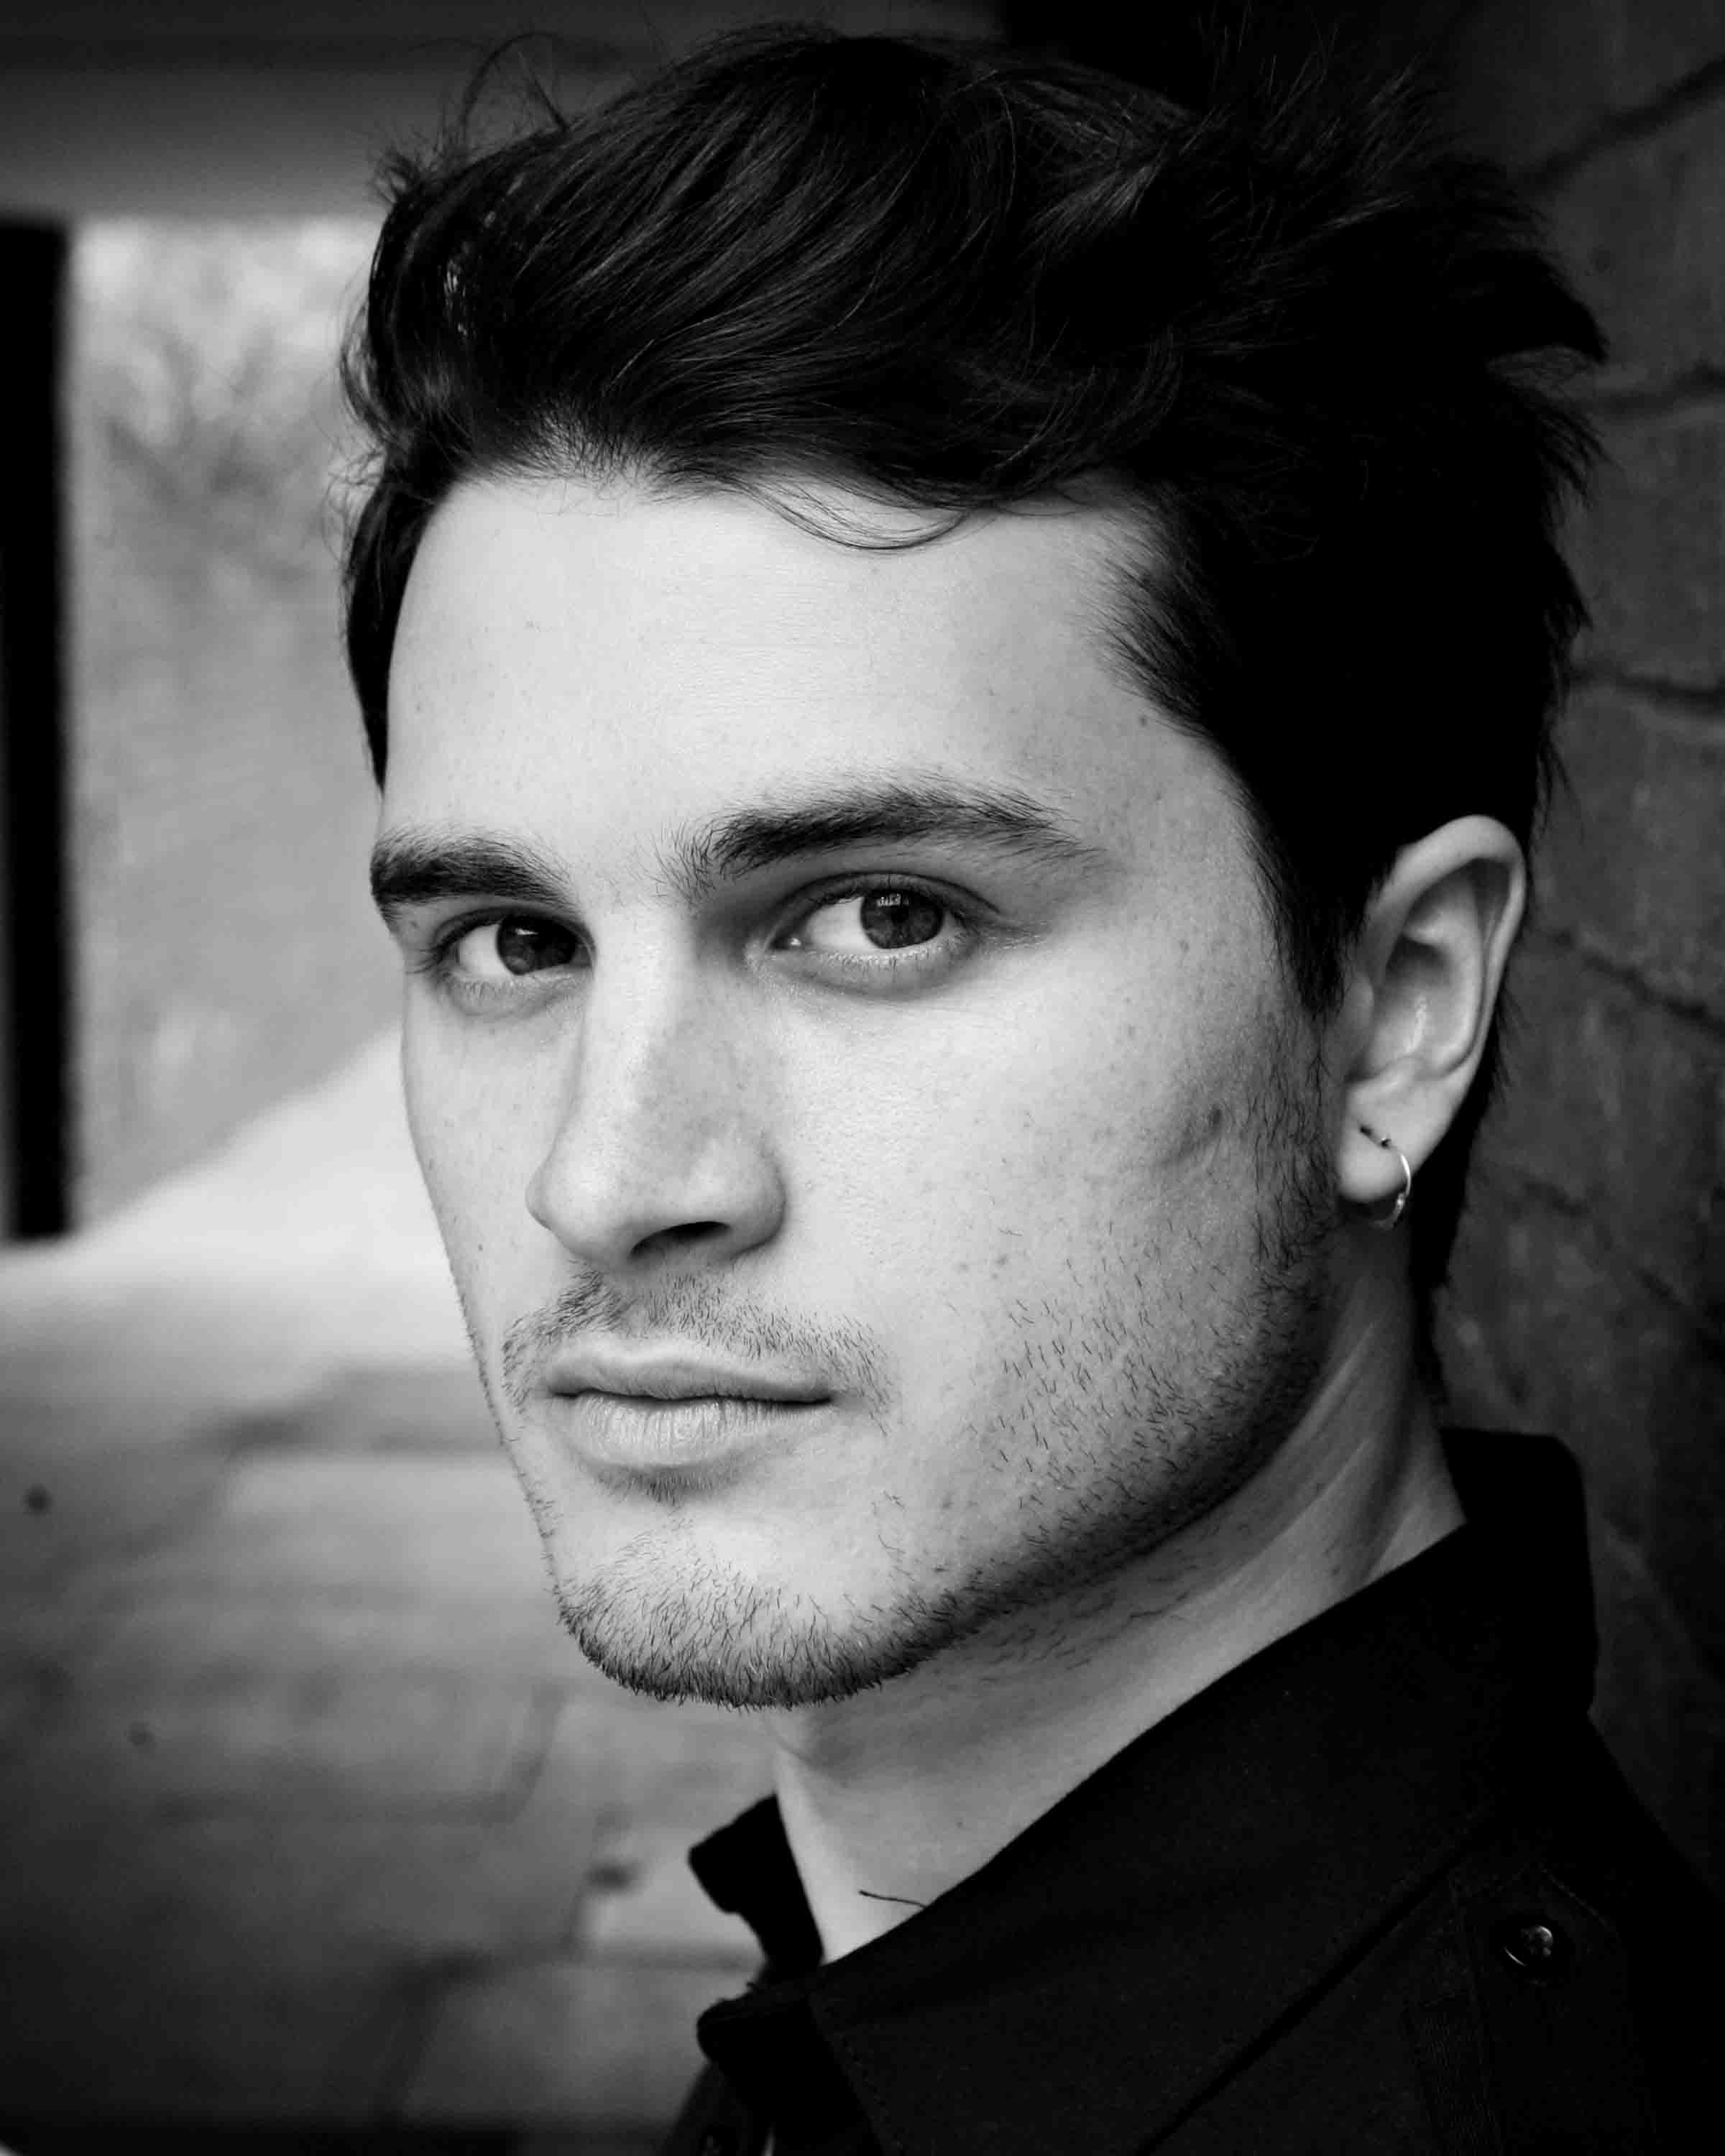 Michael Malarkey (TV's Vampire Diaries) Releases Single, Appearing in London | Planet Stereo